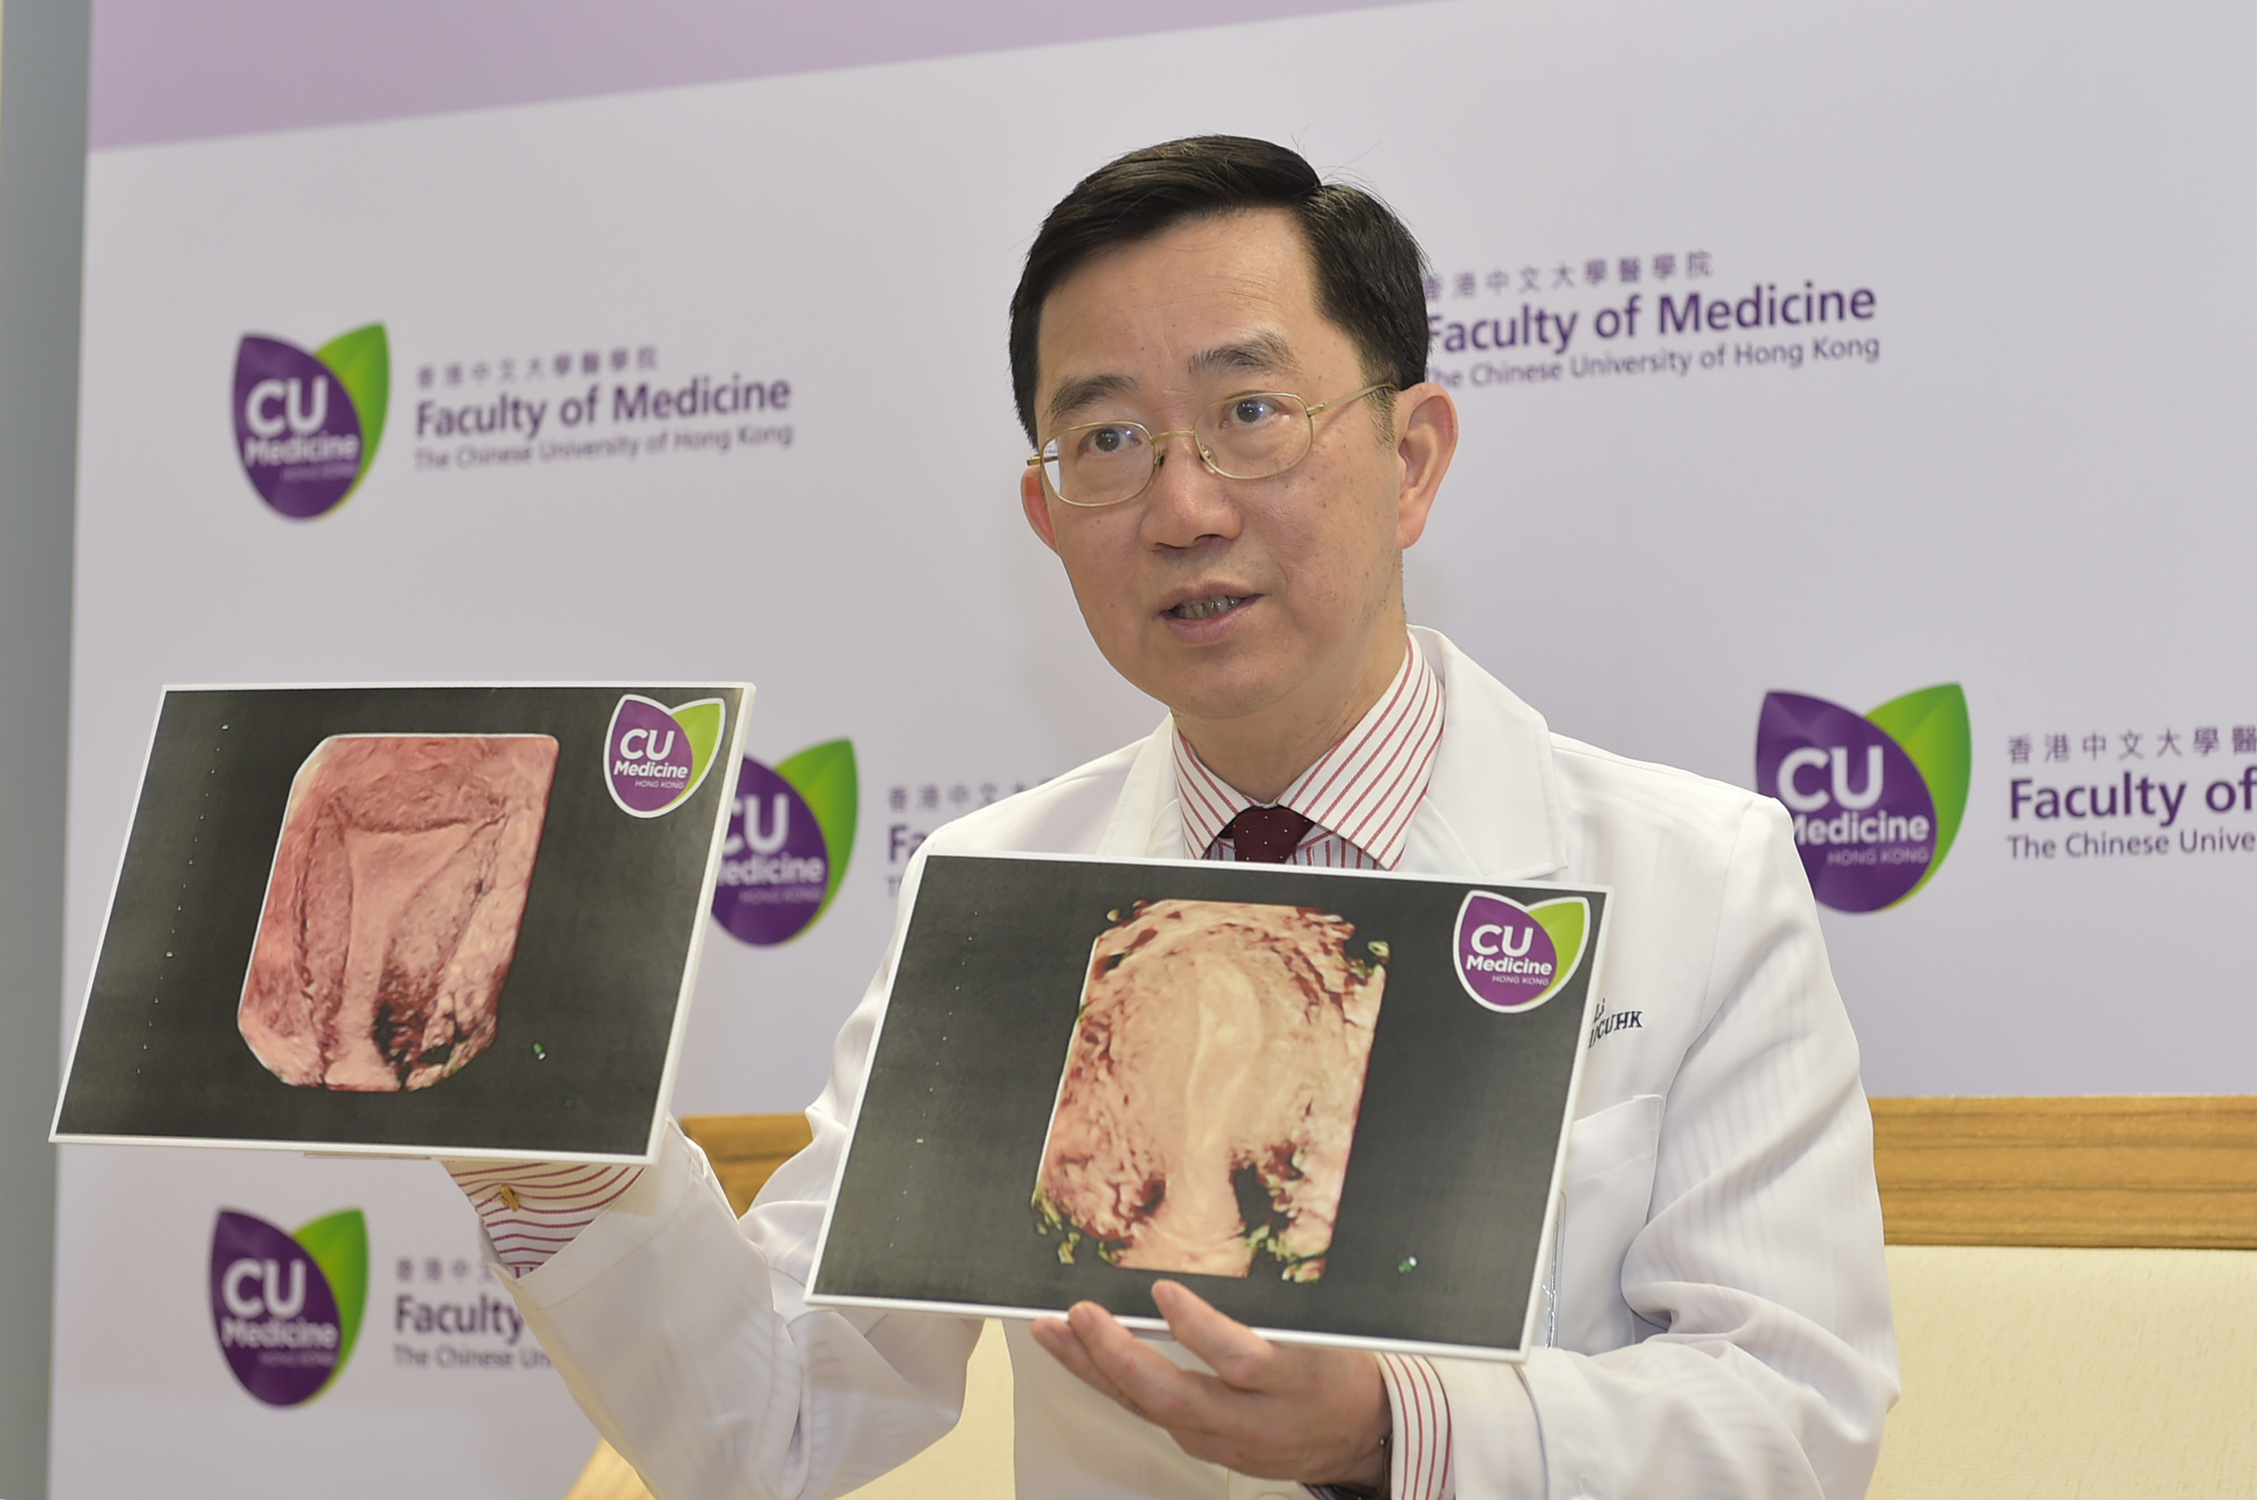 Prof. Li shares his experience and visions on recurrent miscarriage